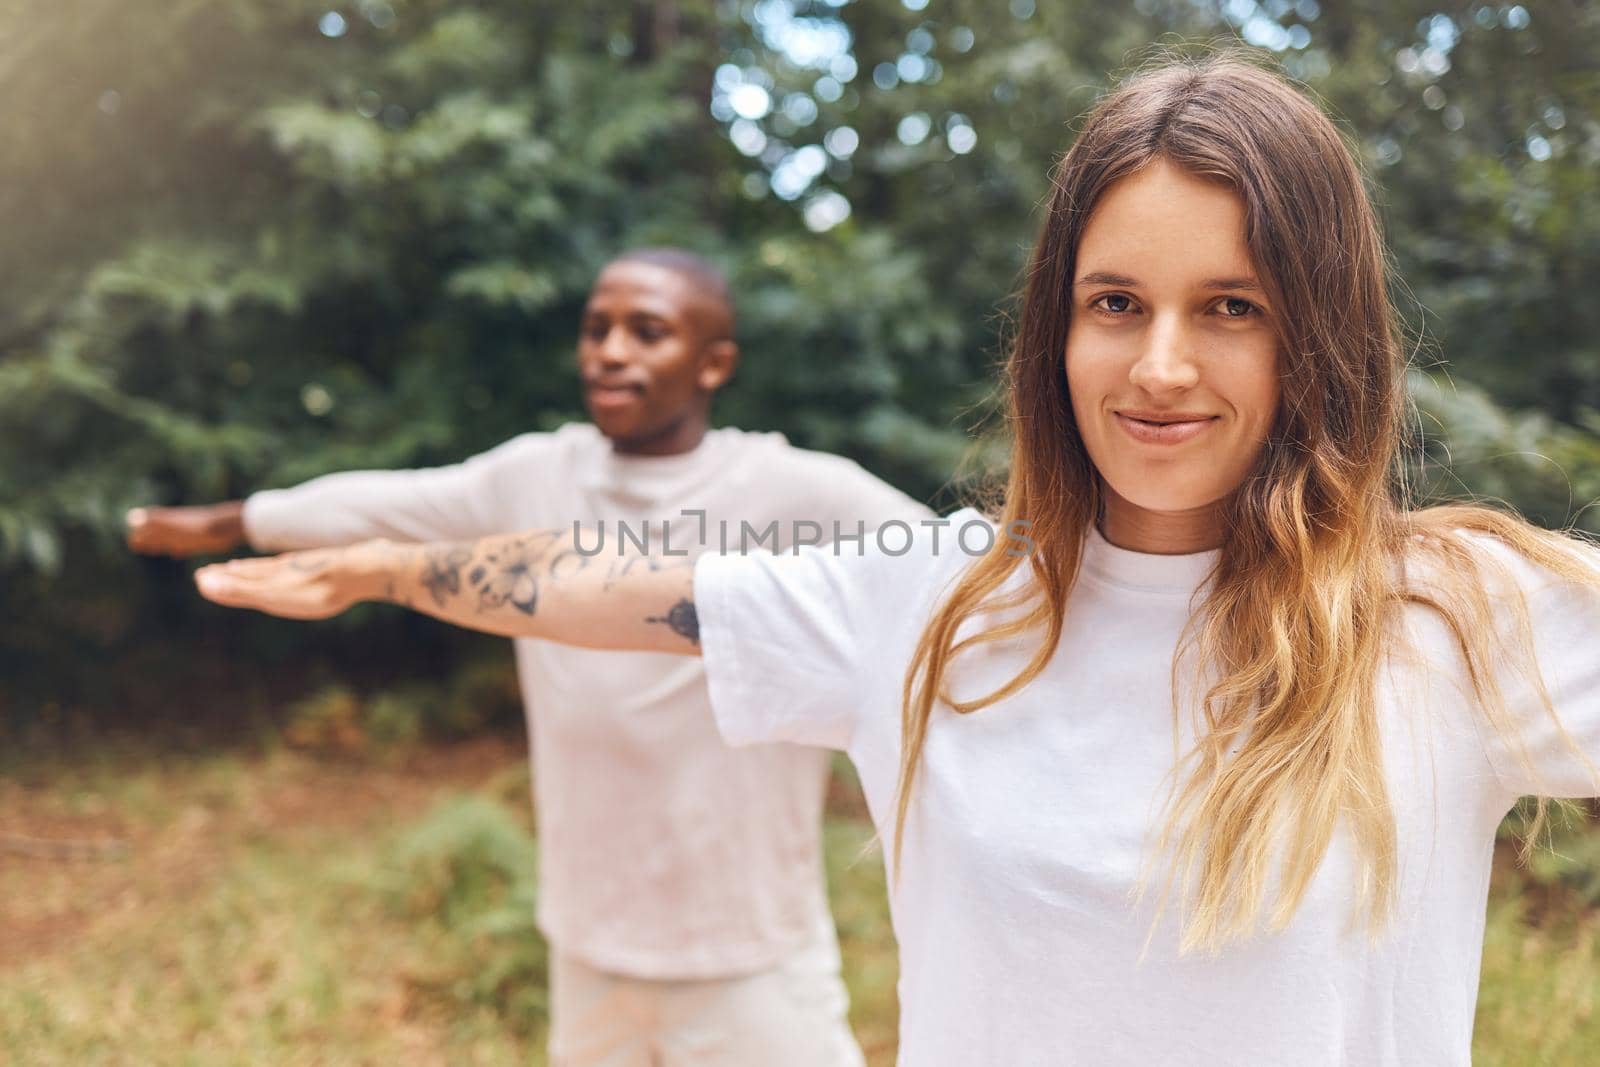 Fitness, zen and yoga couple exercise outdoors in park or forest together, bonding while living a healthy lifestyle. Interracial girlfriend and boyfriend training balance and posture while meditating.